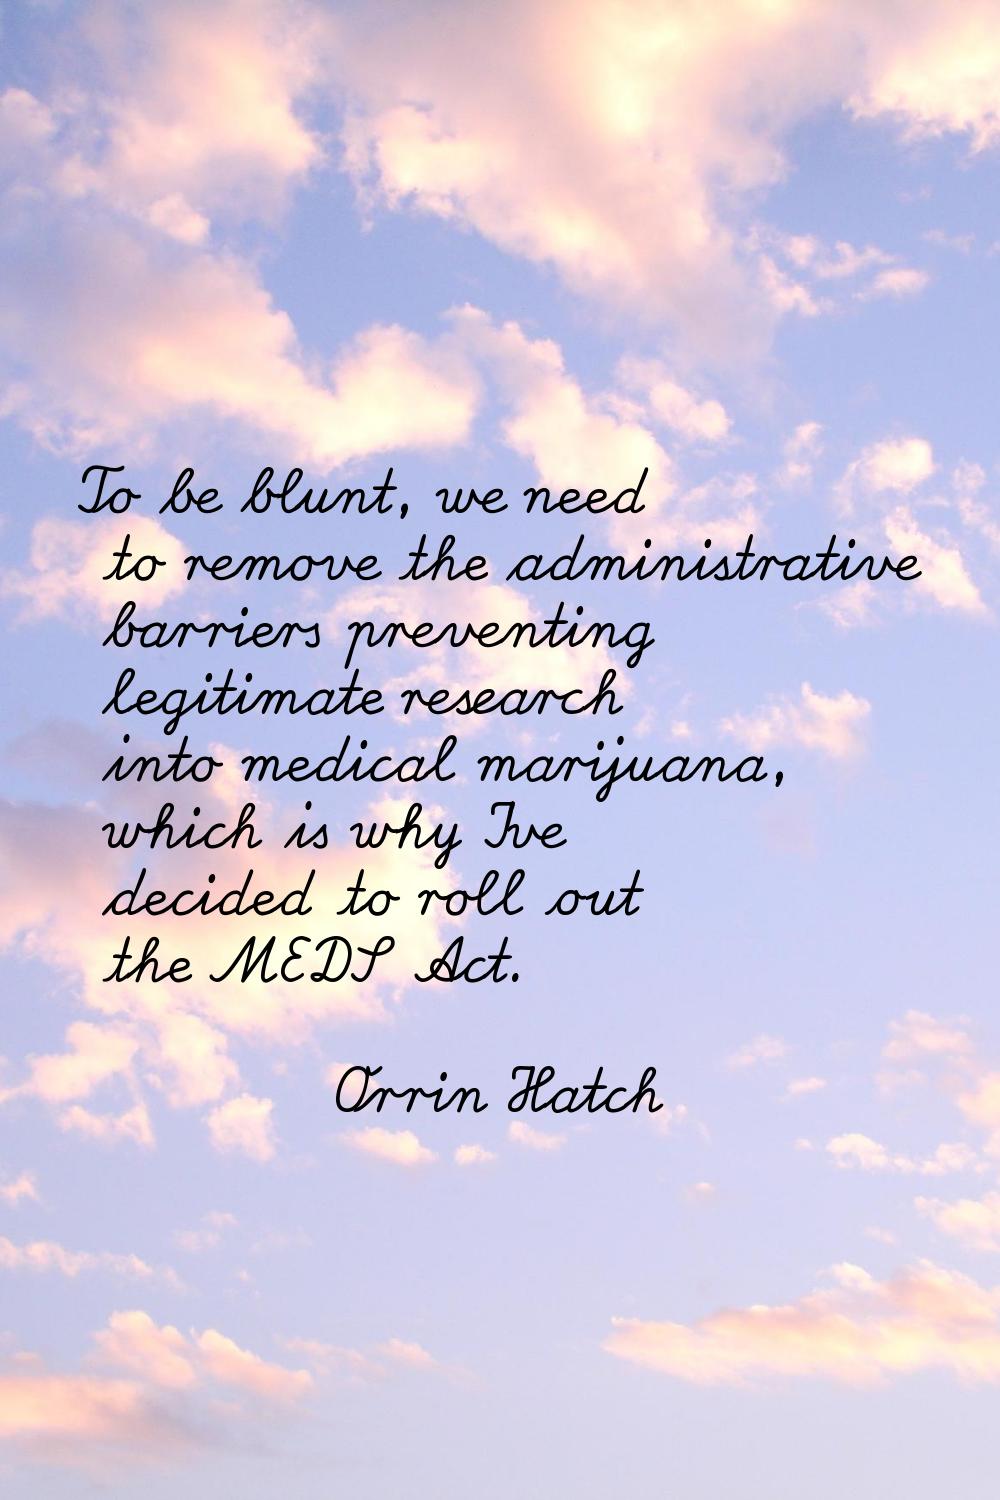 To be blunt, we need to remove the administrative barriers preventing legitimate research into medi